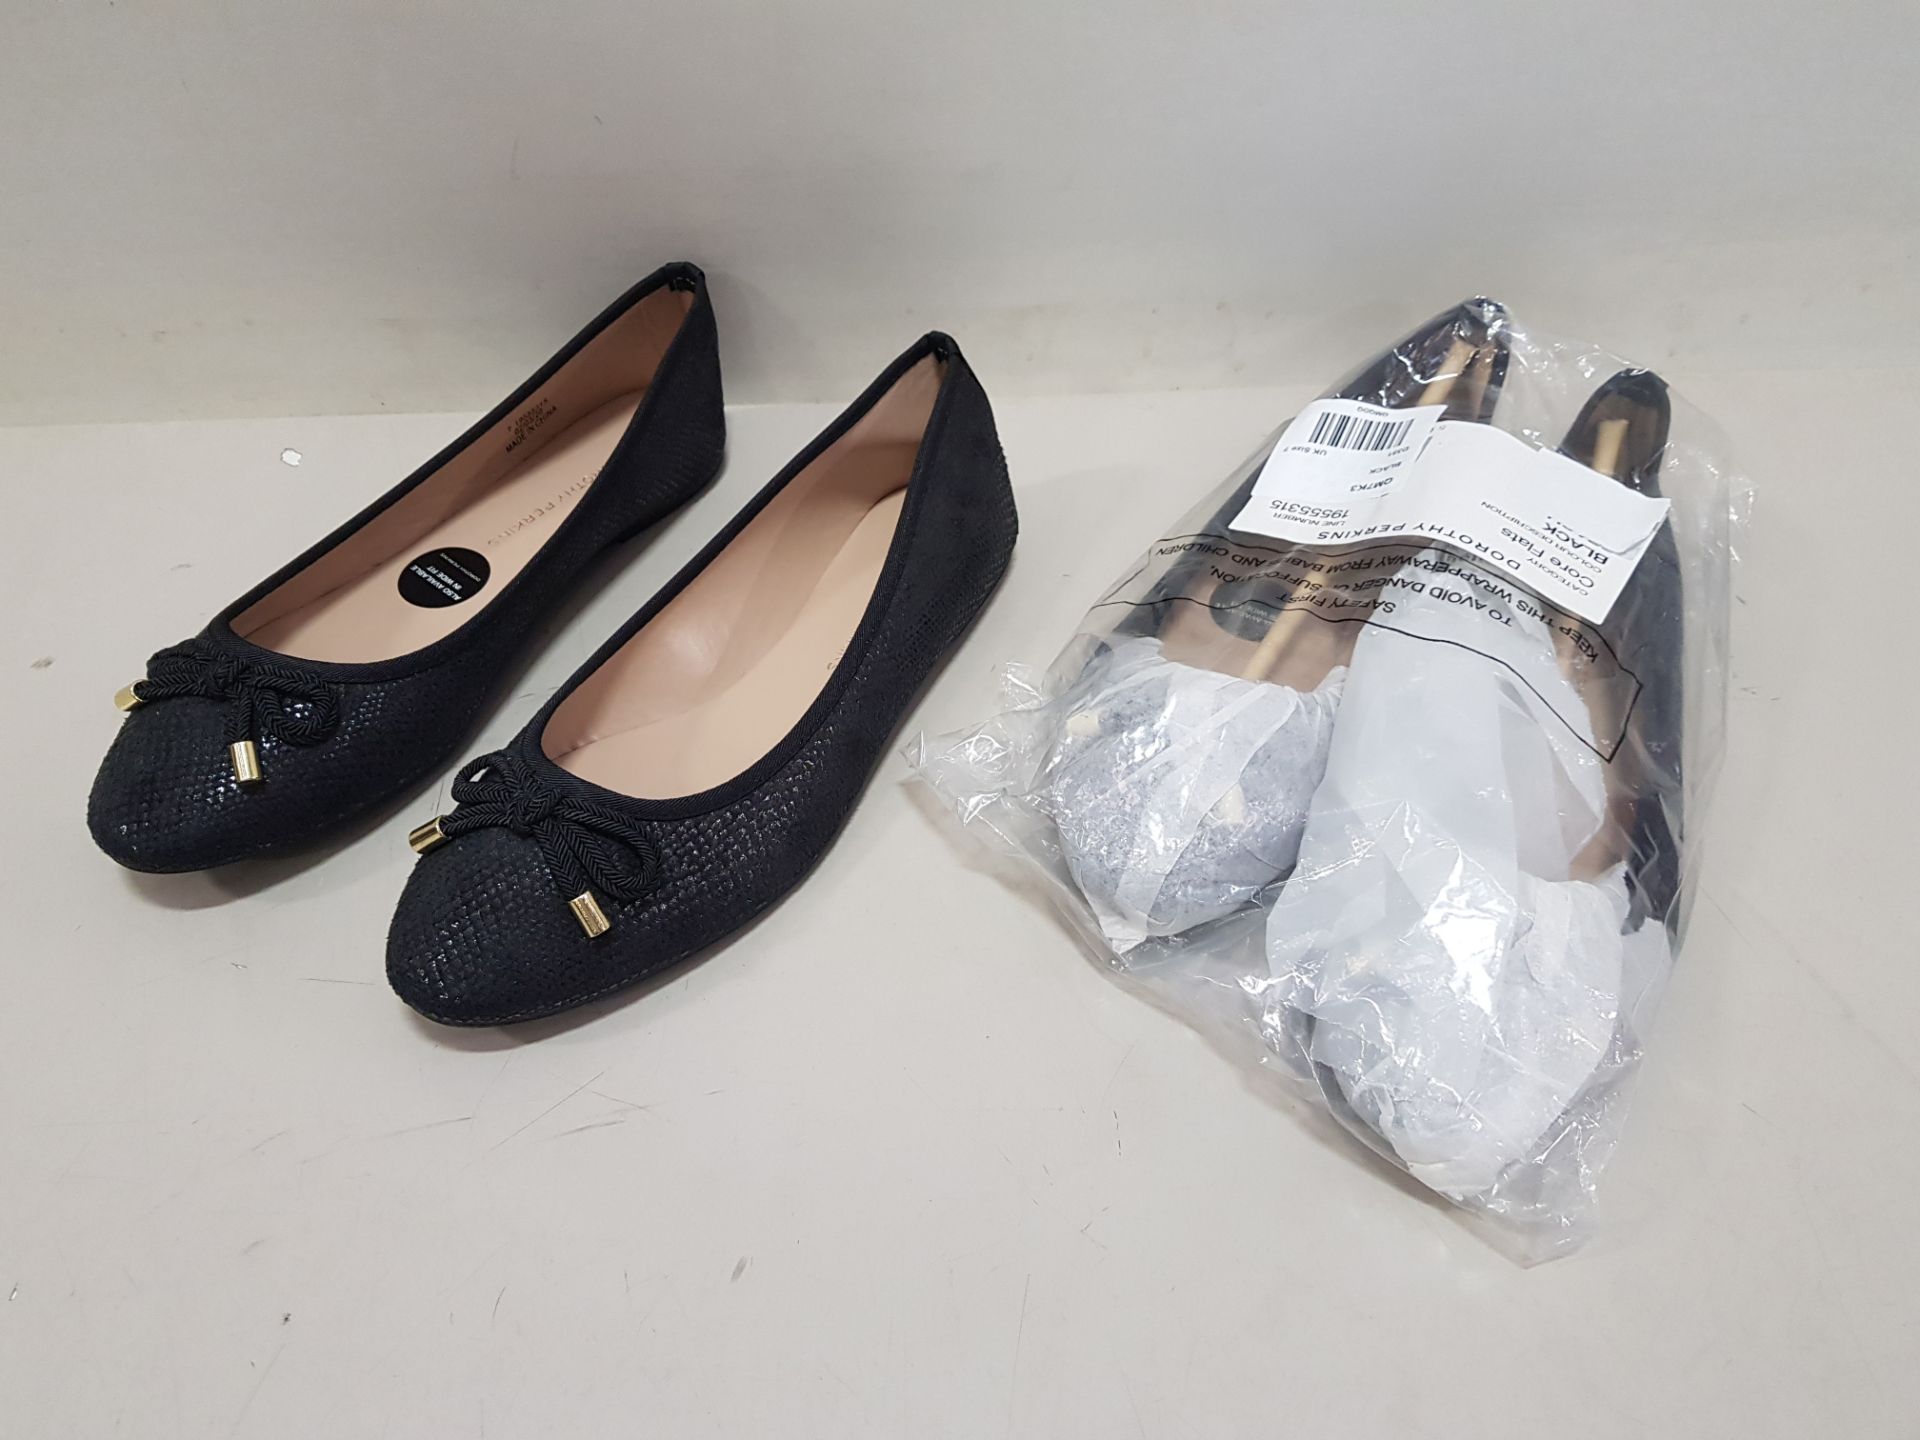 21 X BRAND NEW DOROTHY PERKINS CORE FLATS BLACK SHOES UK SIZE 3, 4 AND 8